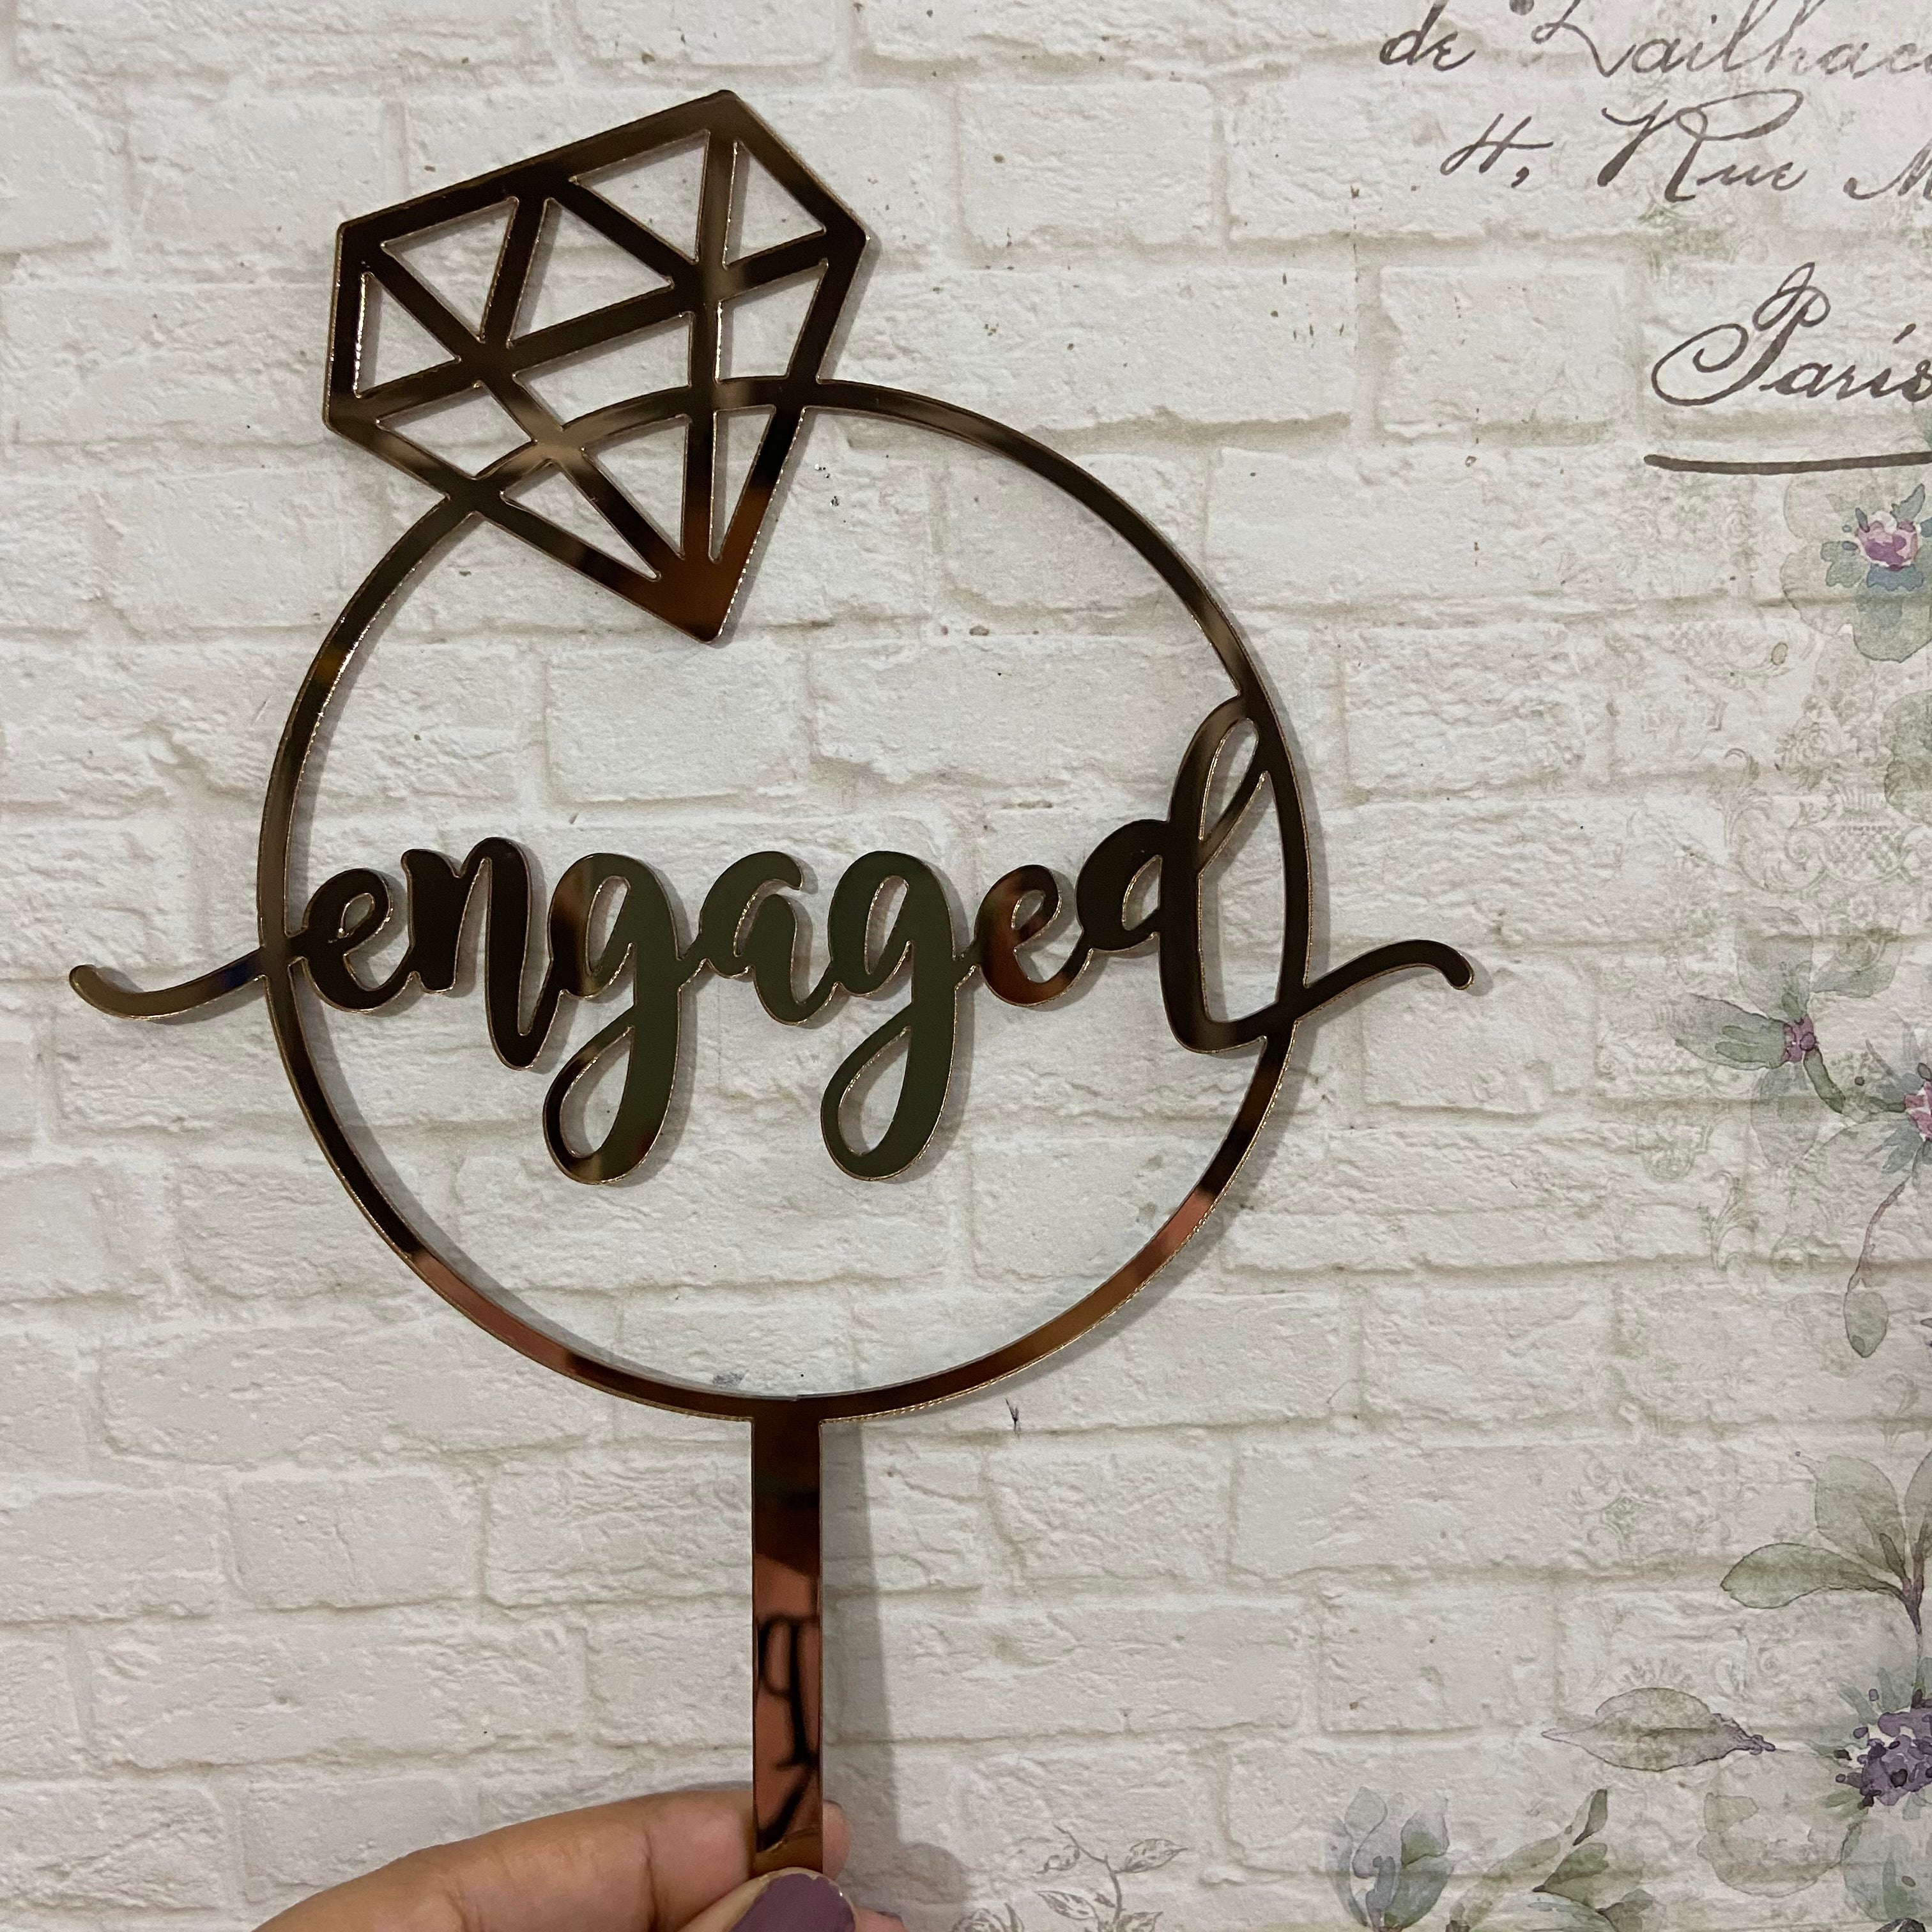 Finally Got Engaged Couple Cake Topper Wedding Cake Topper Color Option  Available 6